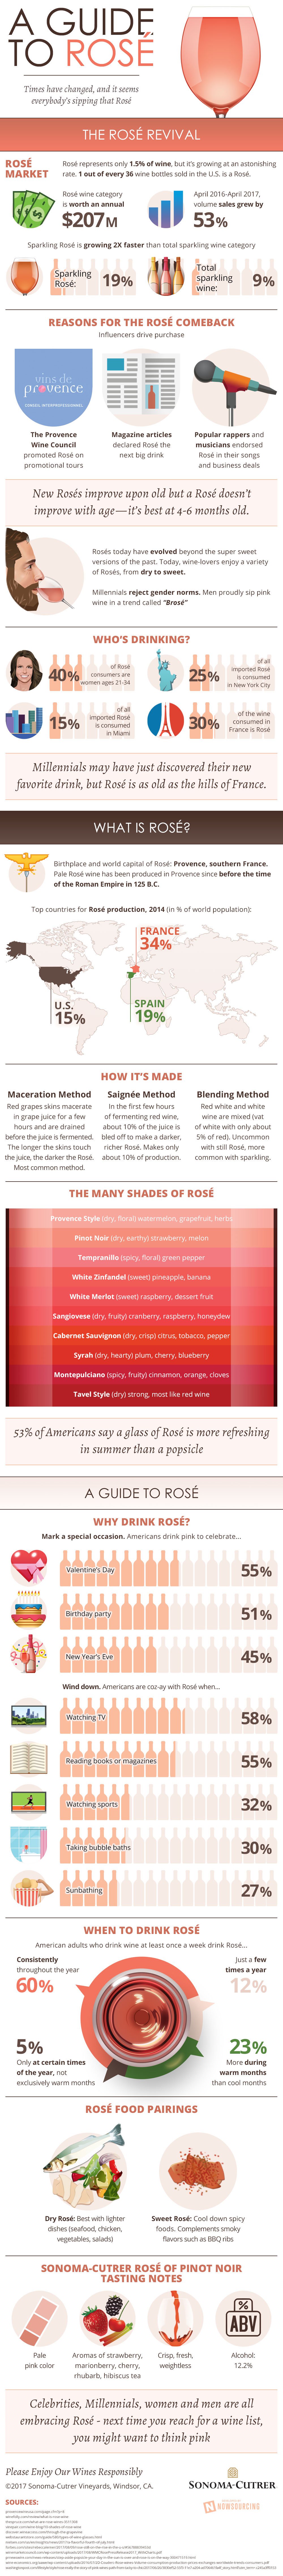 A Guide To Rosé